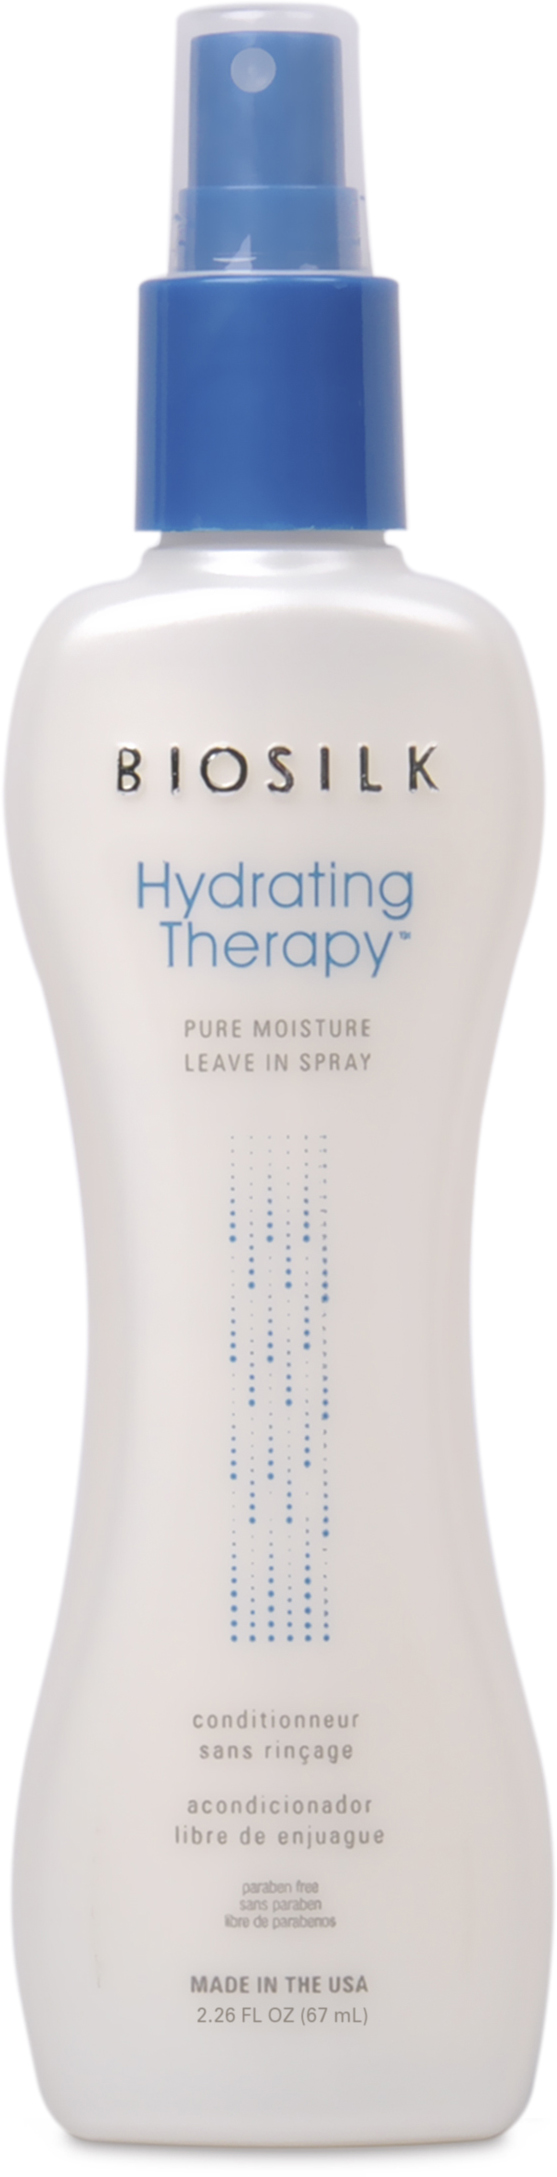 Biosilk Hydrating Therapy Pure Moisture Leave-in Spary